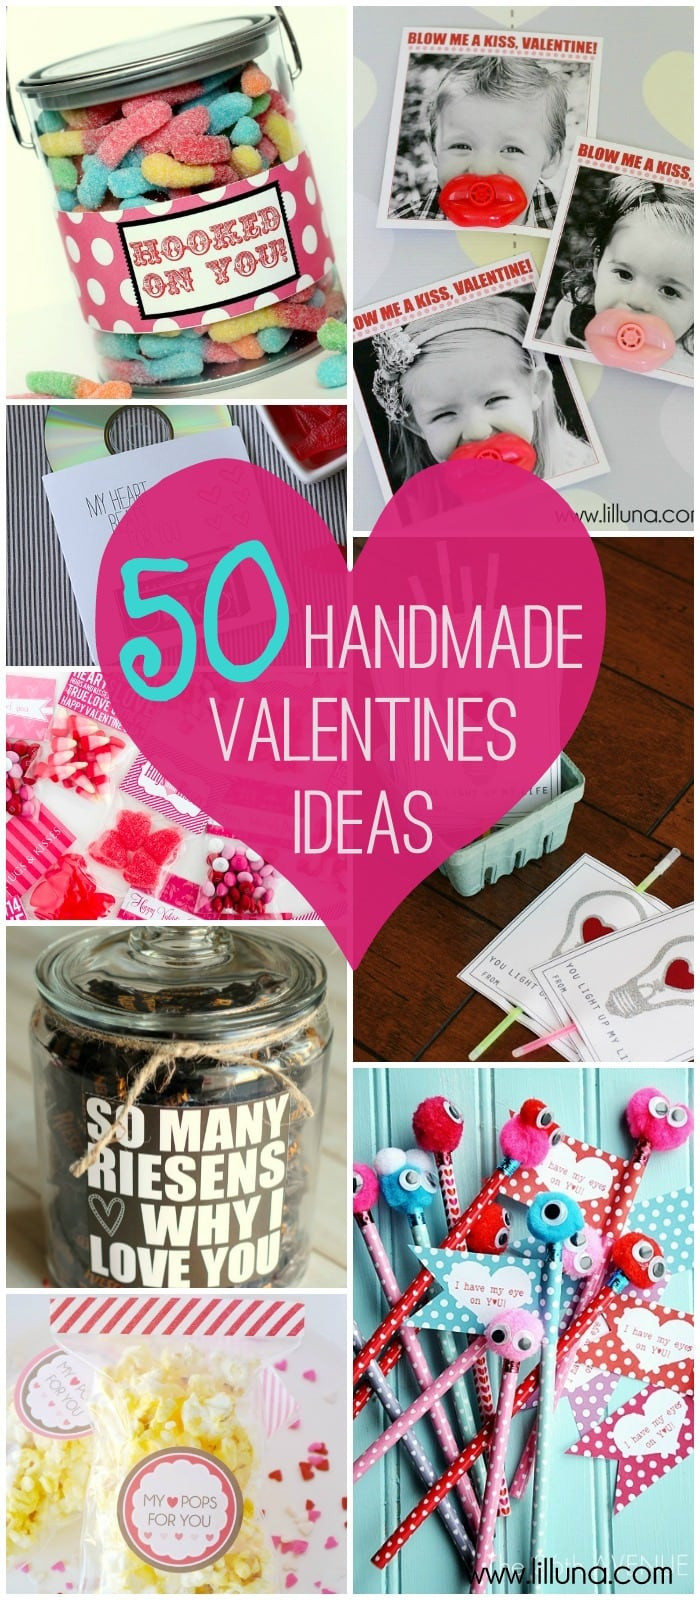 Free Valentine Gift Ideas
 14 Gifts of Valentines with Free Printables plus MORE